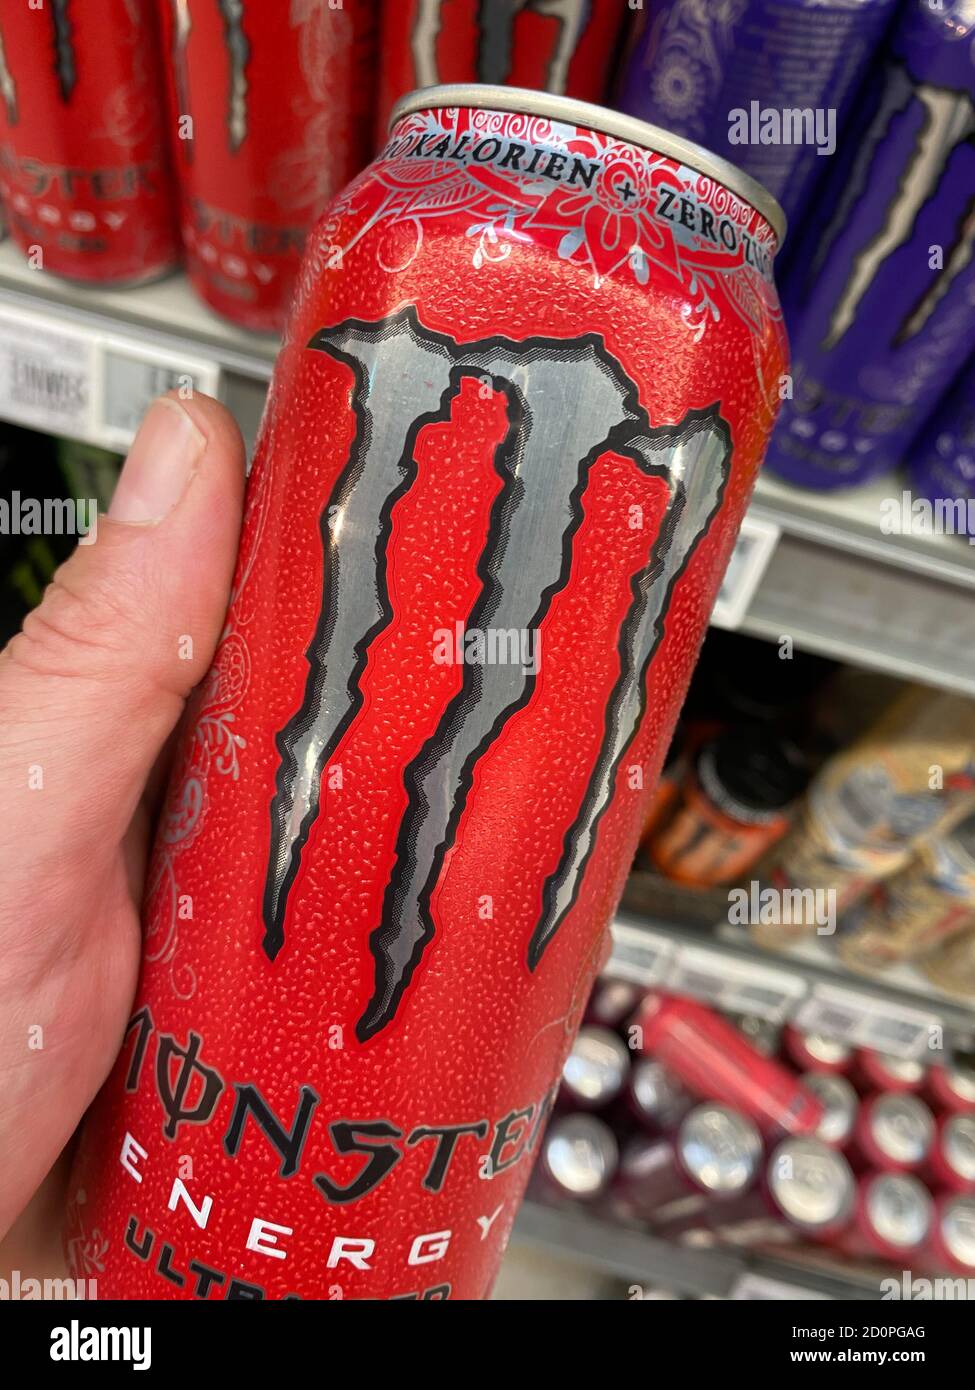 Viersen, Germany - July 9. 2020: View on can monster energy drink in german  supermarket (focus on center Stock Photo - Alamy